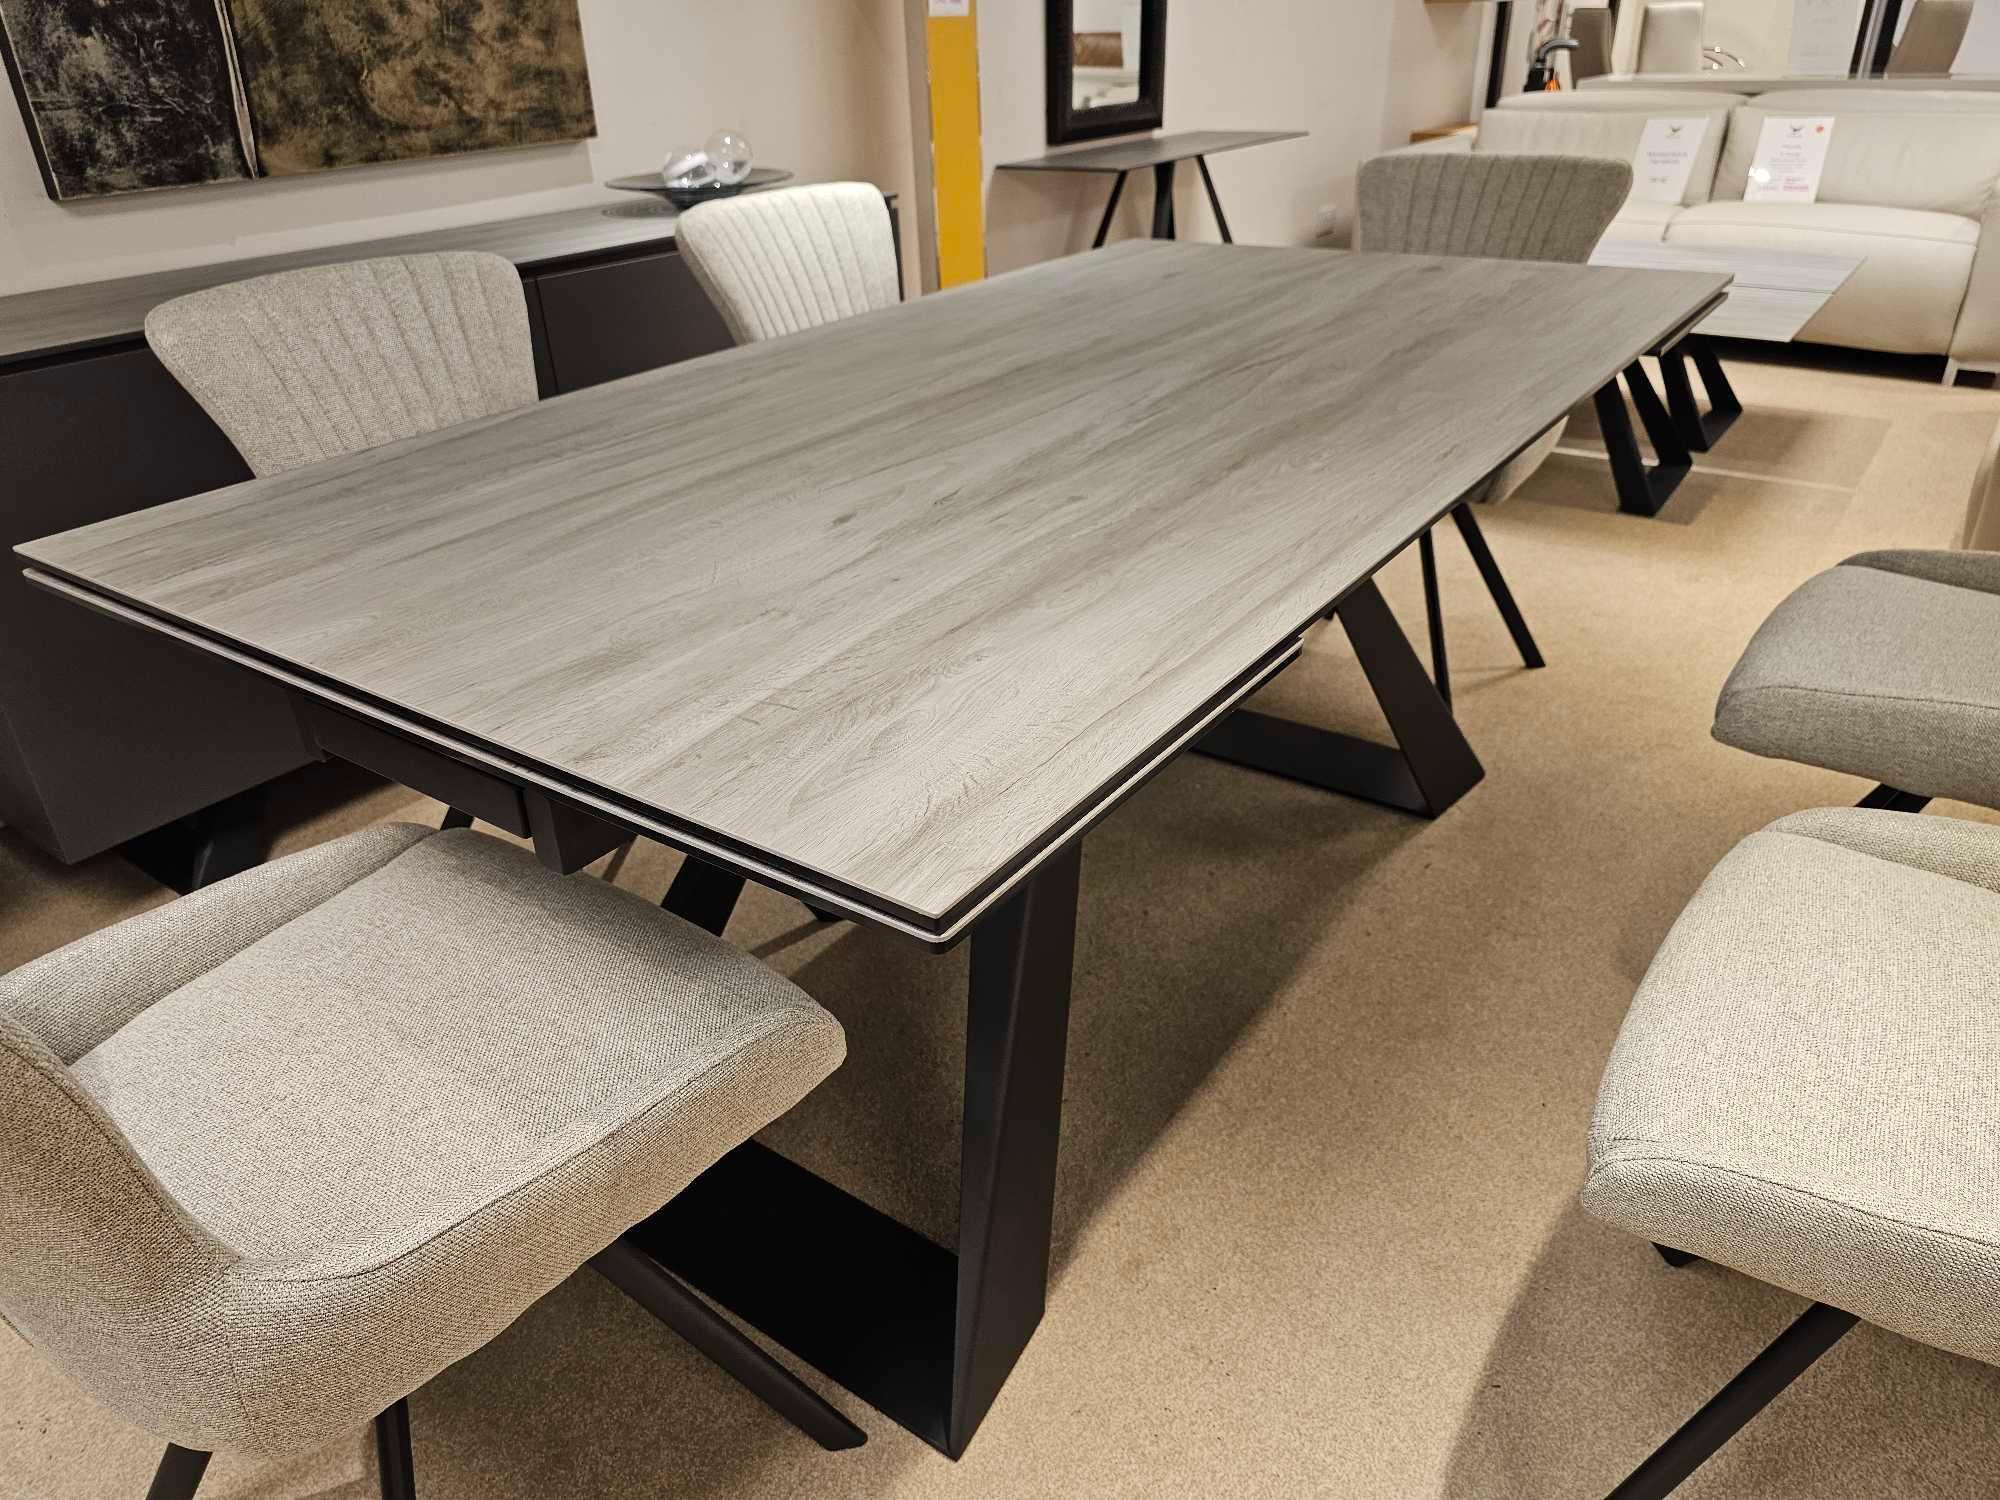 Spartan Dining Table by Kesterport The Spartan Dining Table is part of a sophisticated collection of - Image 3 of 12